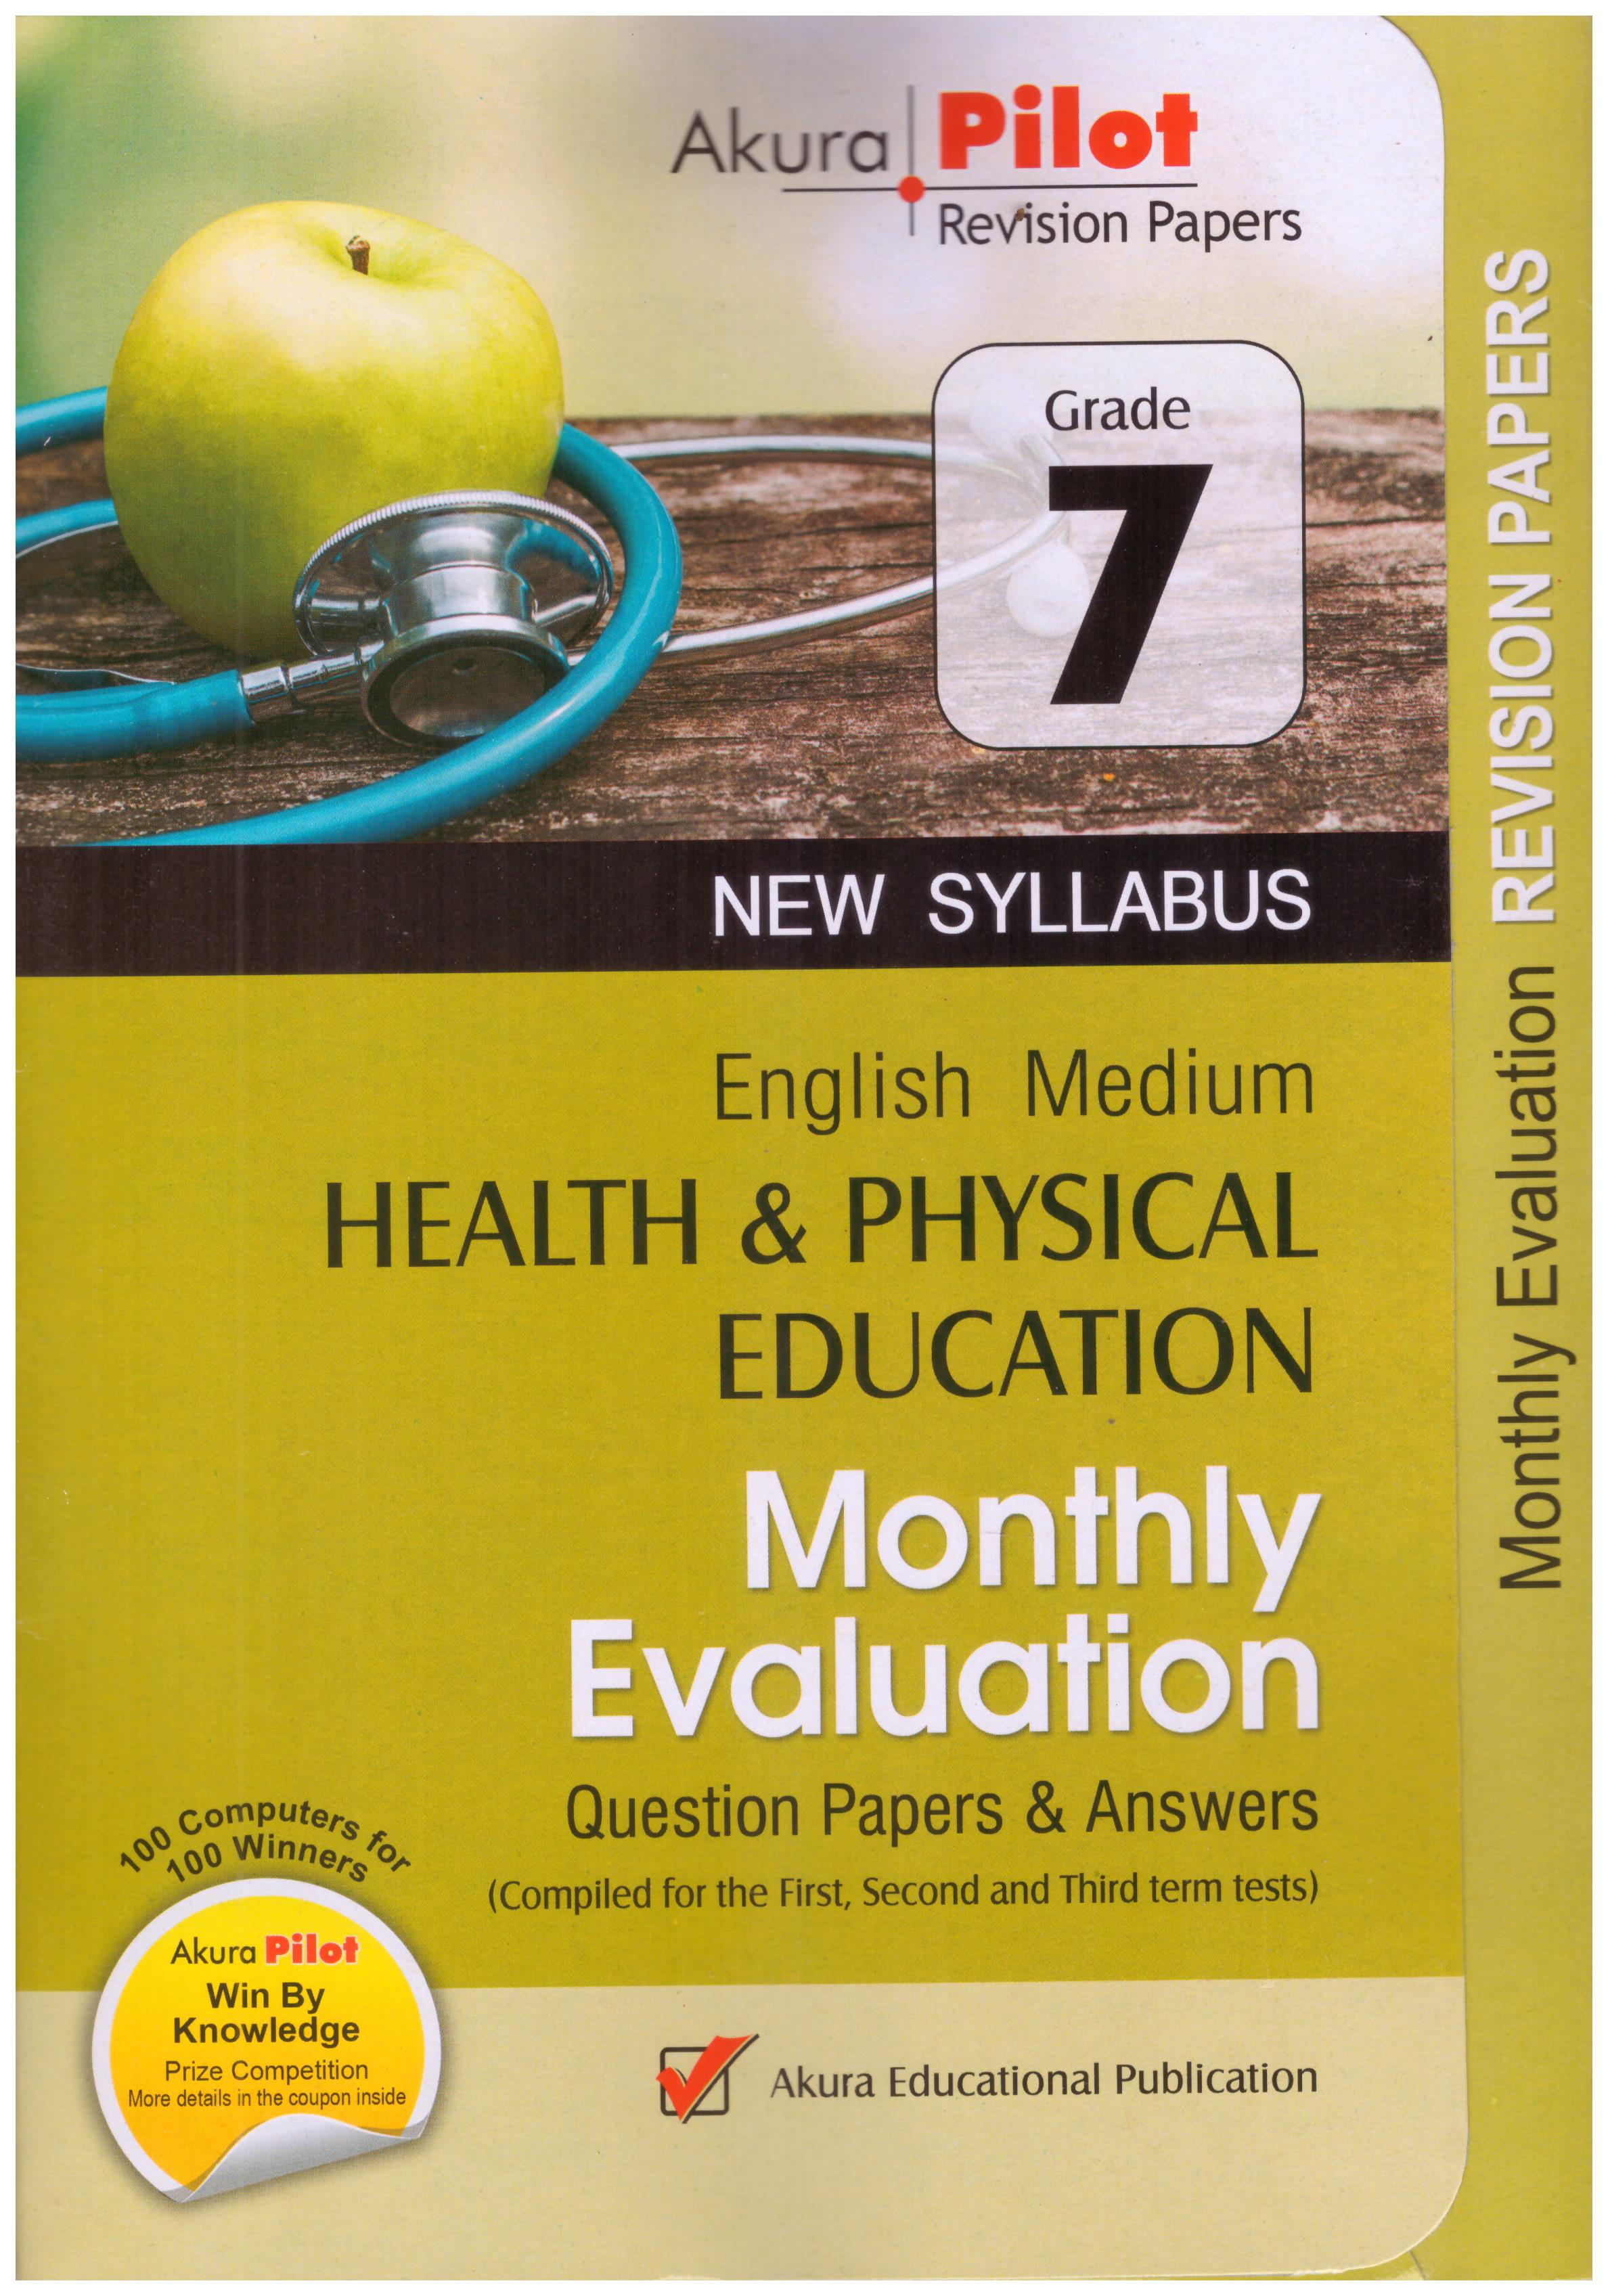 Akura Pilot Grade 7 Health and Physical Education Monthly Evaluation Question Papers and Answers (New Syllabus)